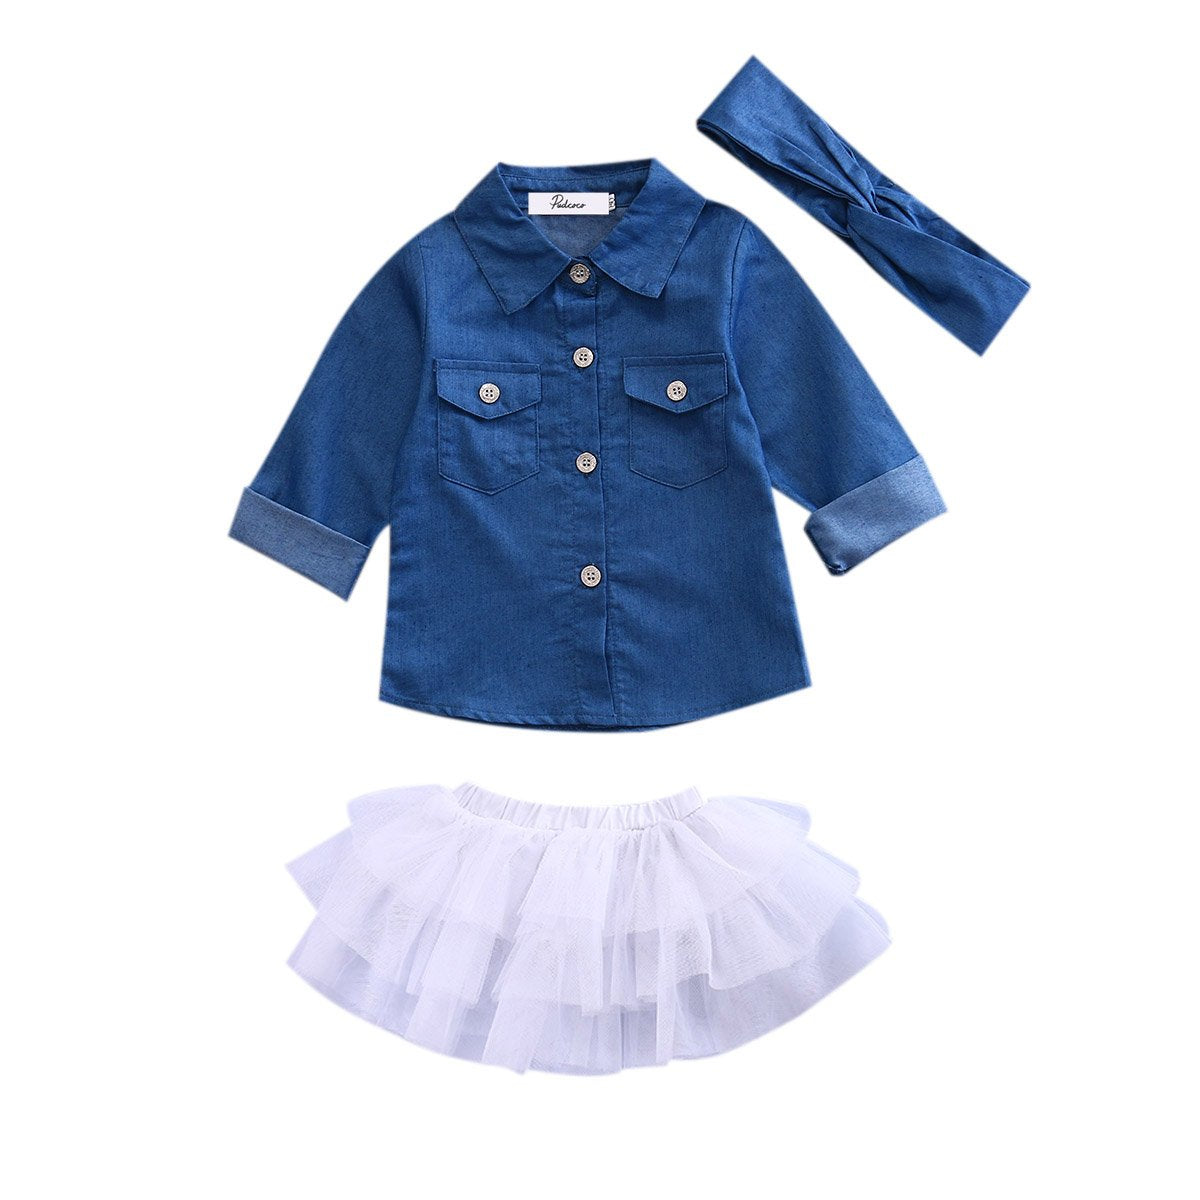 baby girl sets and outfits